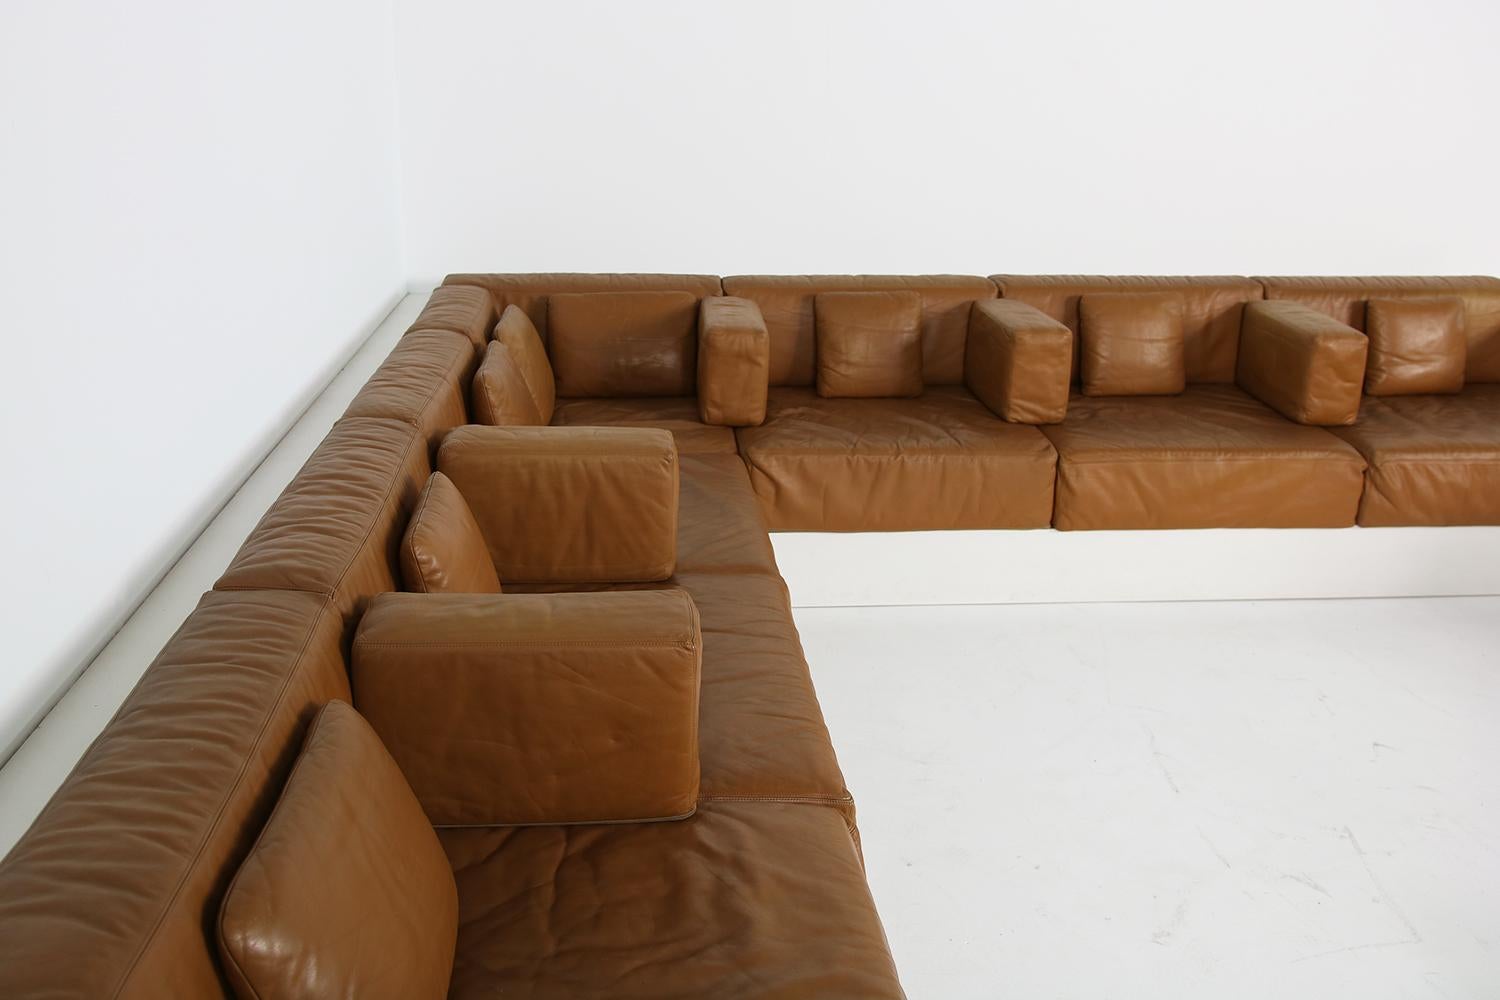 Unique & Large 1960s Landscape Sofa & Chairs Brown Leather Made to Order 1969 For Sale 5